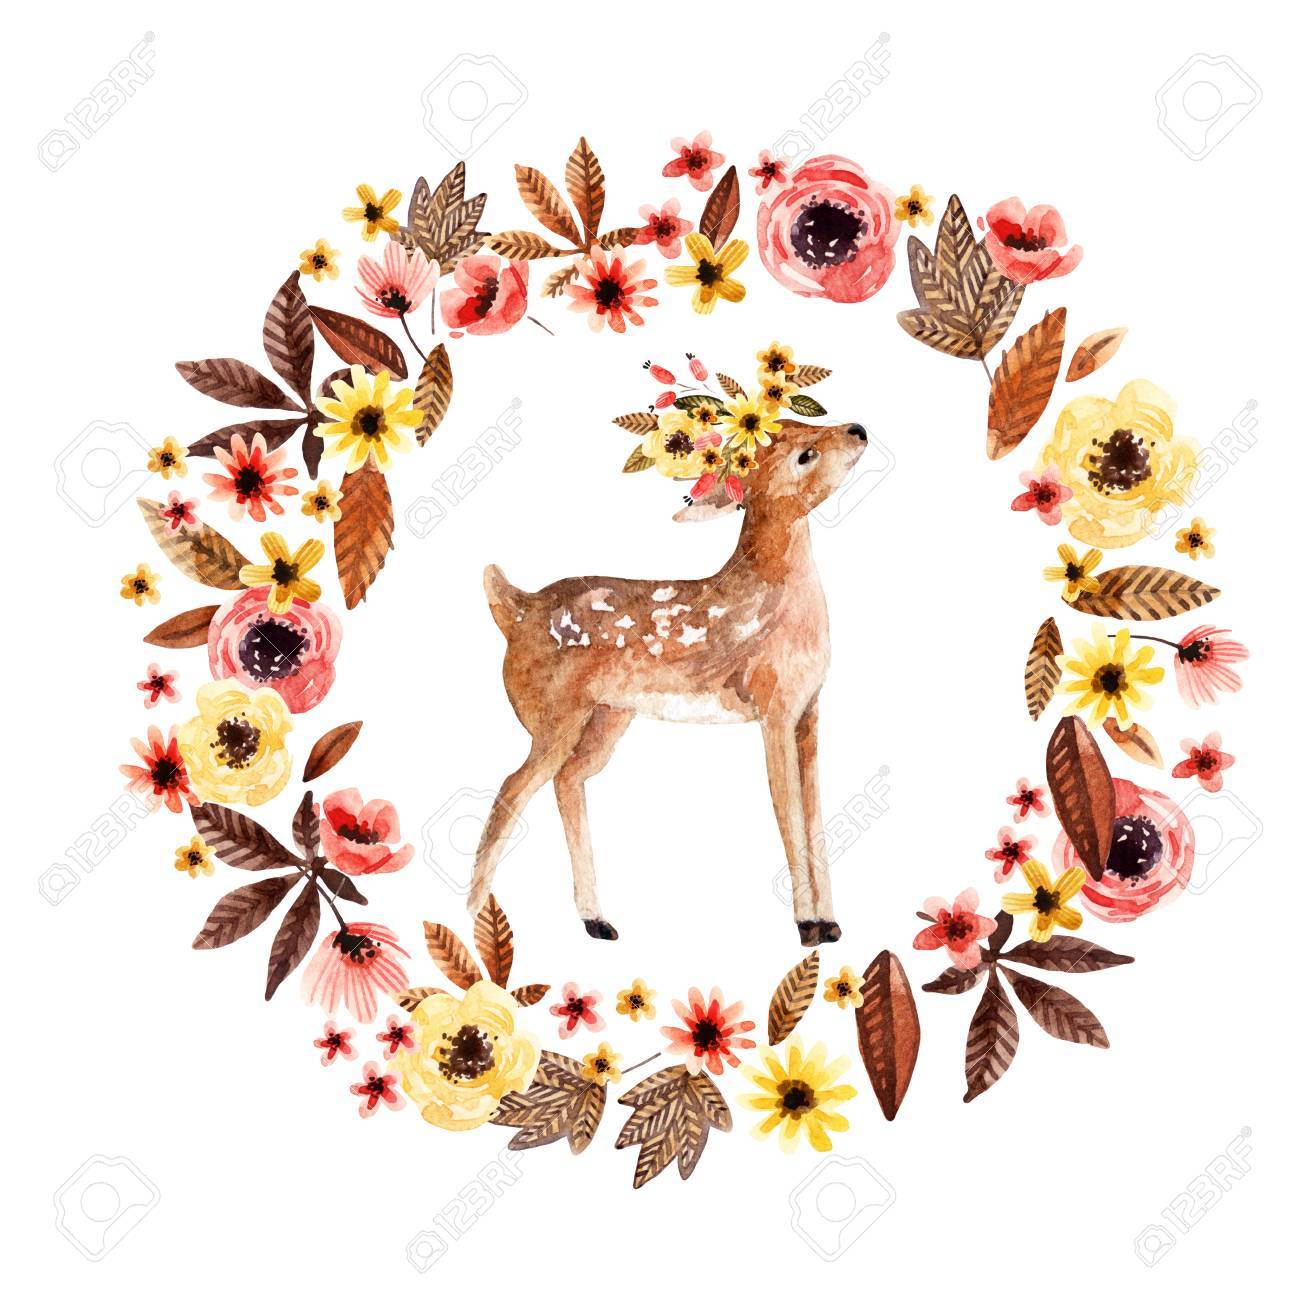 Watercolor Deer Fawn Among Flowers Isolated On White Background